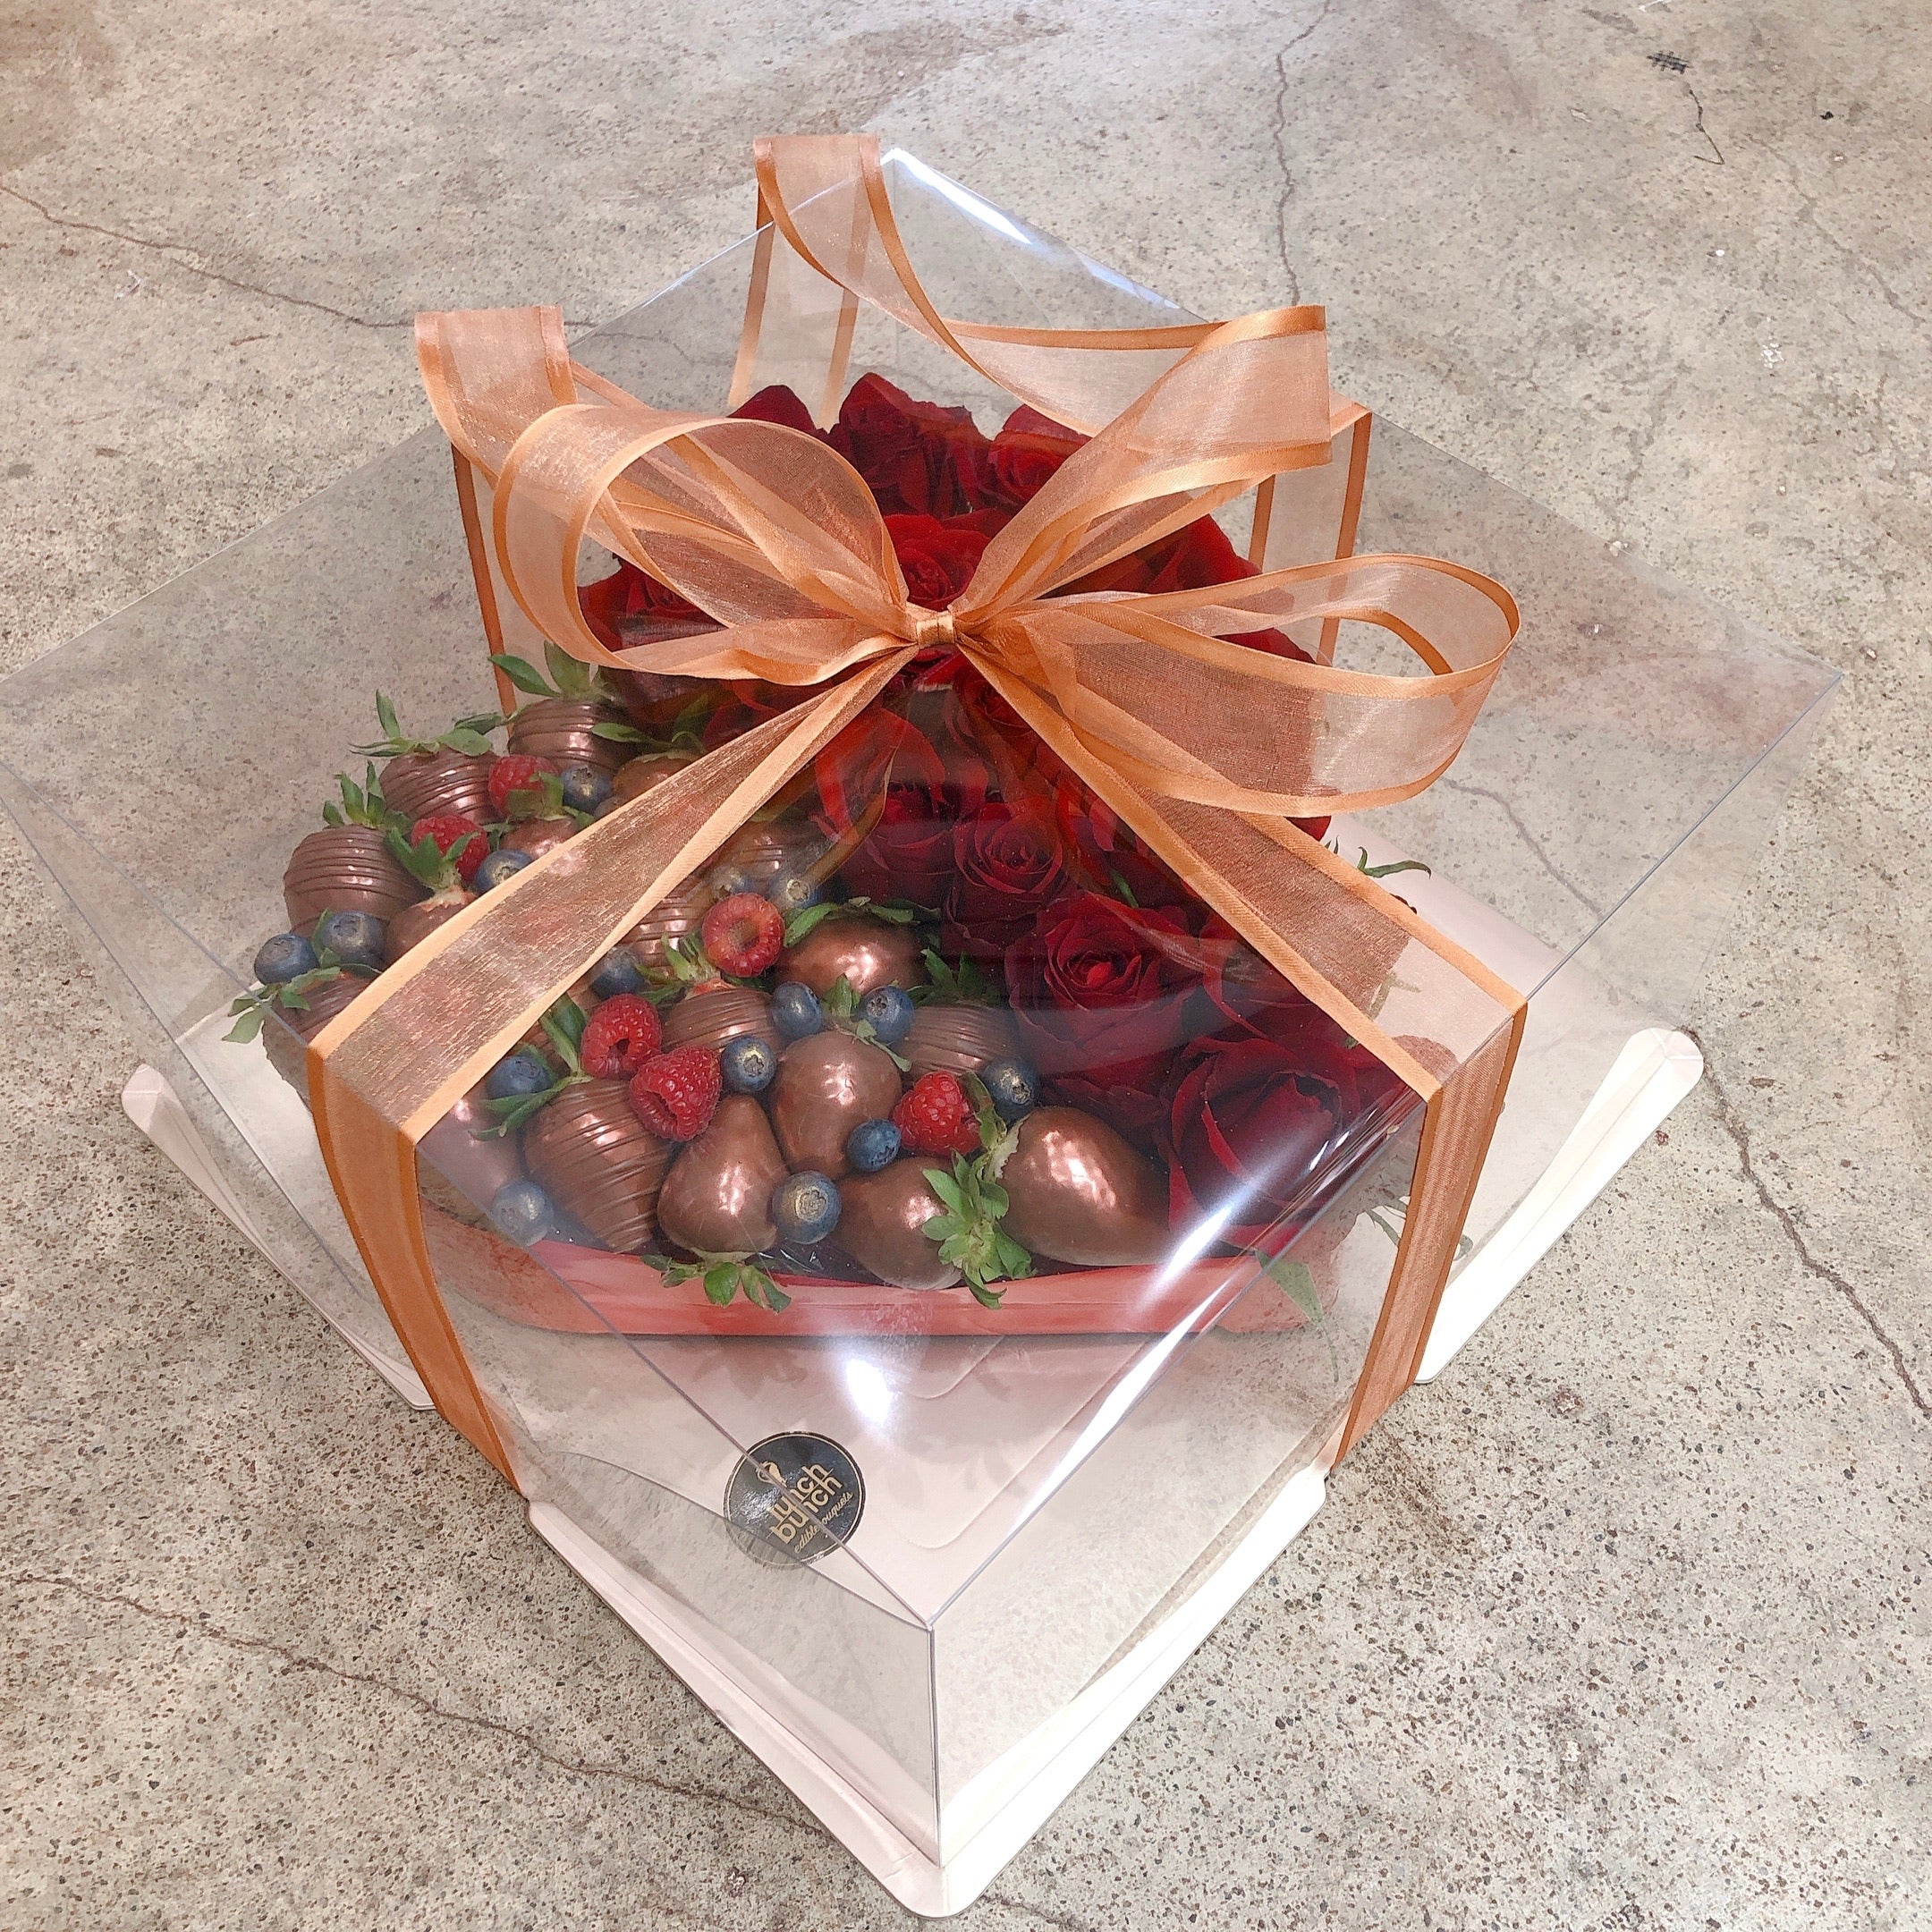 Chocolate strawberries and flowers in love heart gift box same day delivery